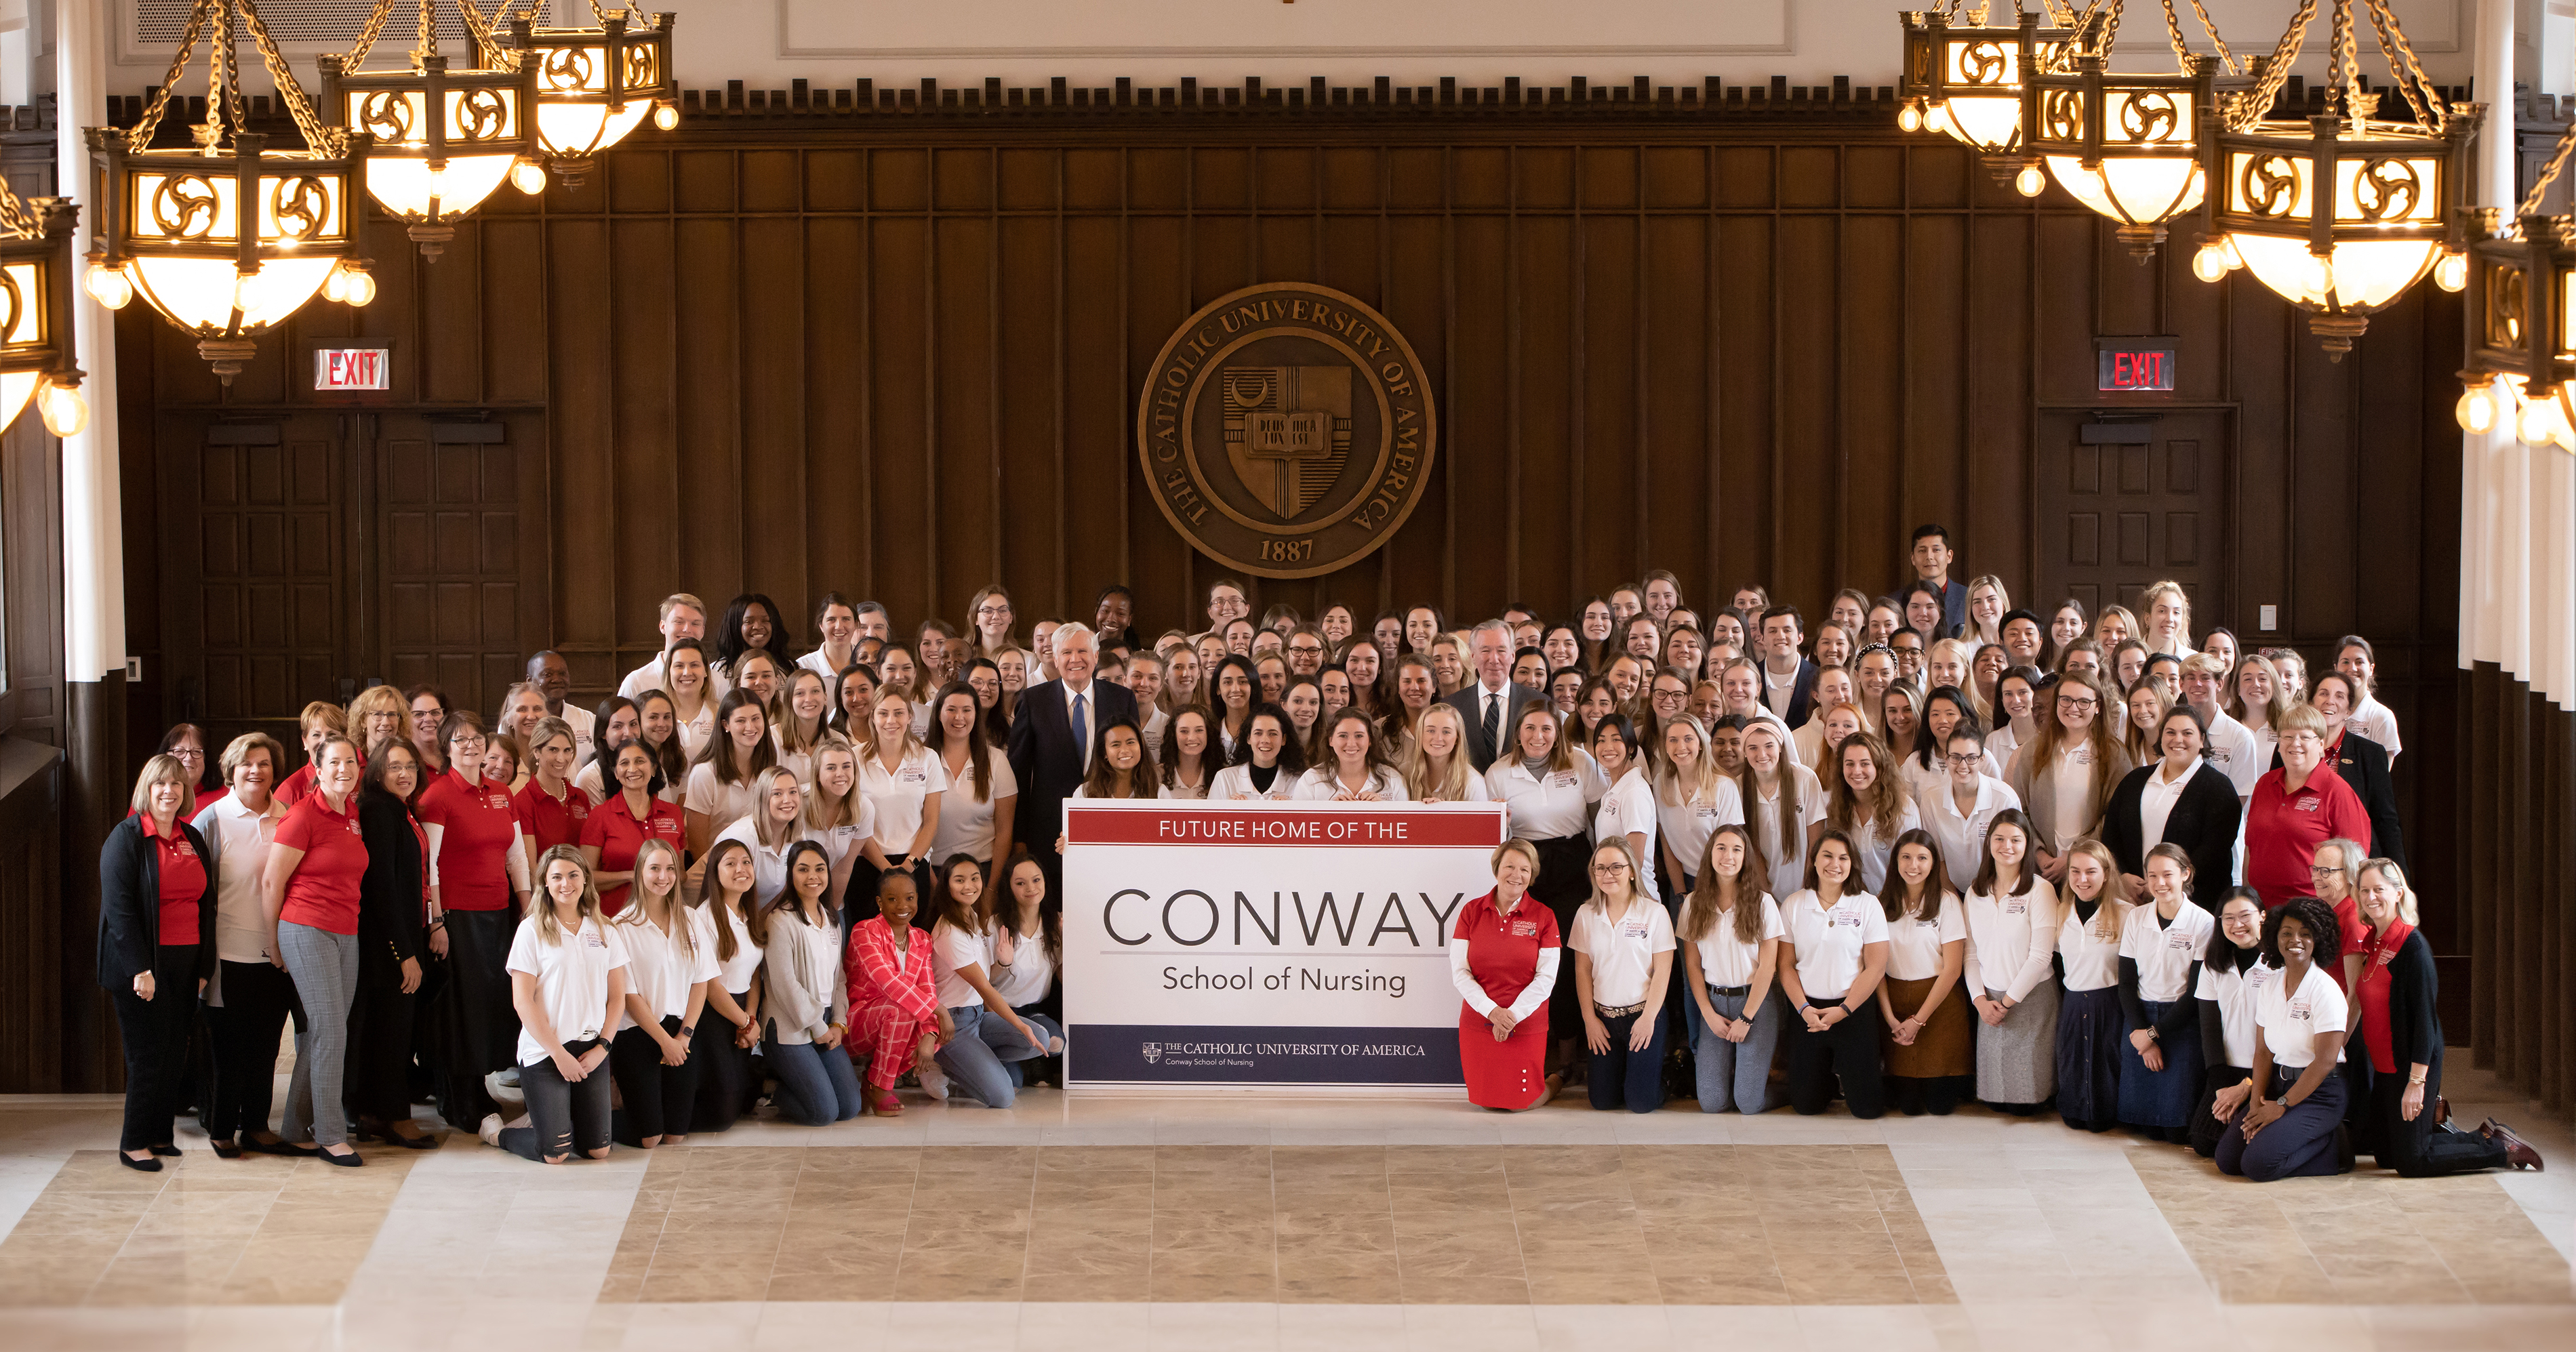 Bill Conway with nursing students, faculty, and staff